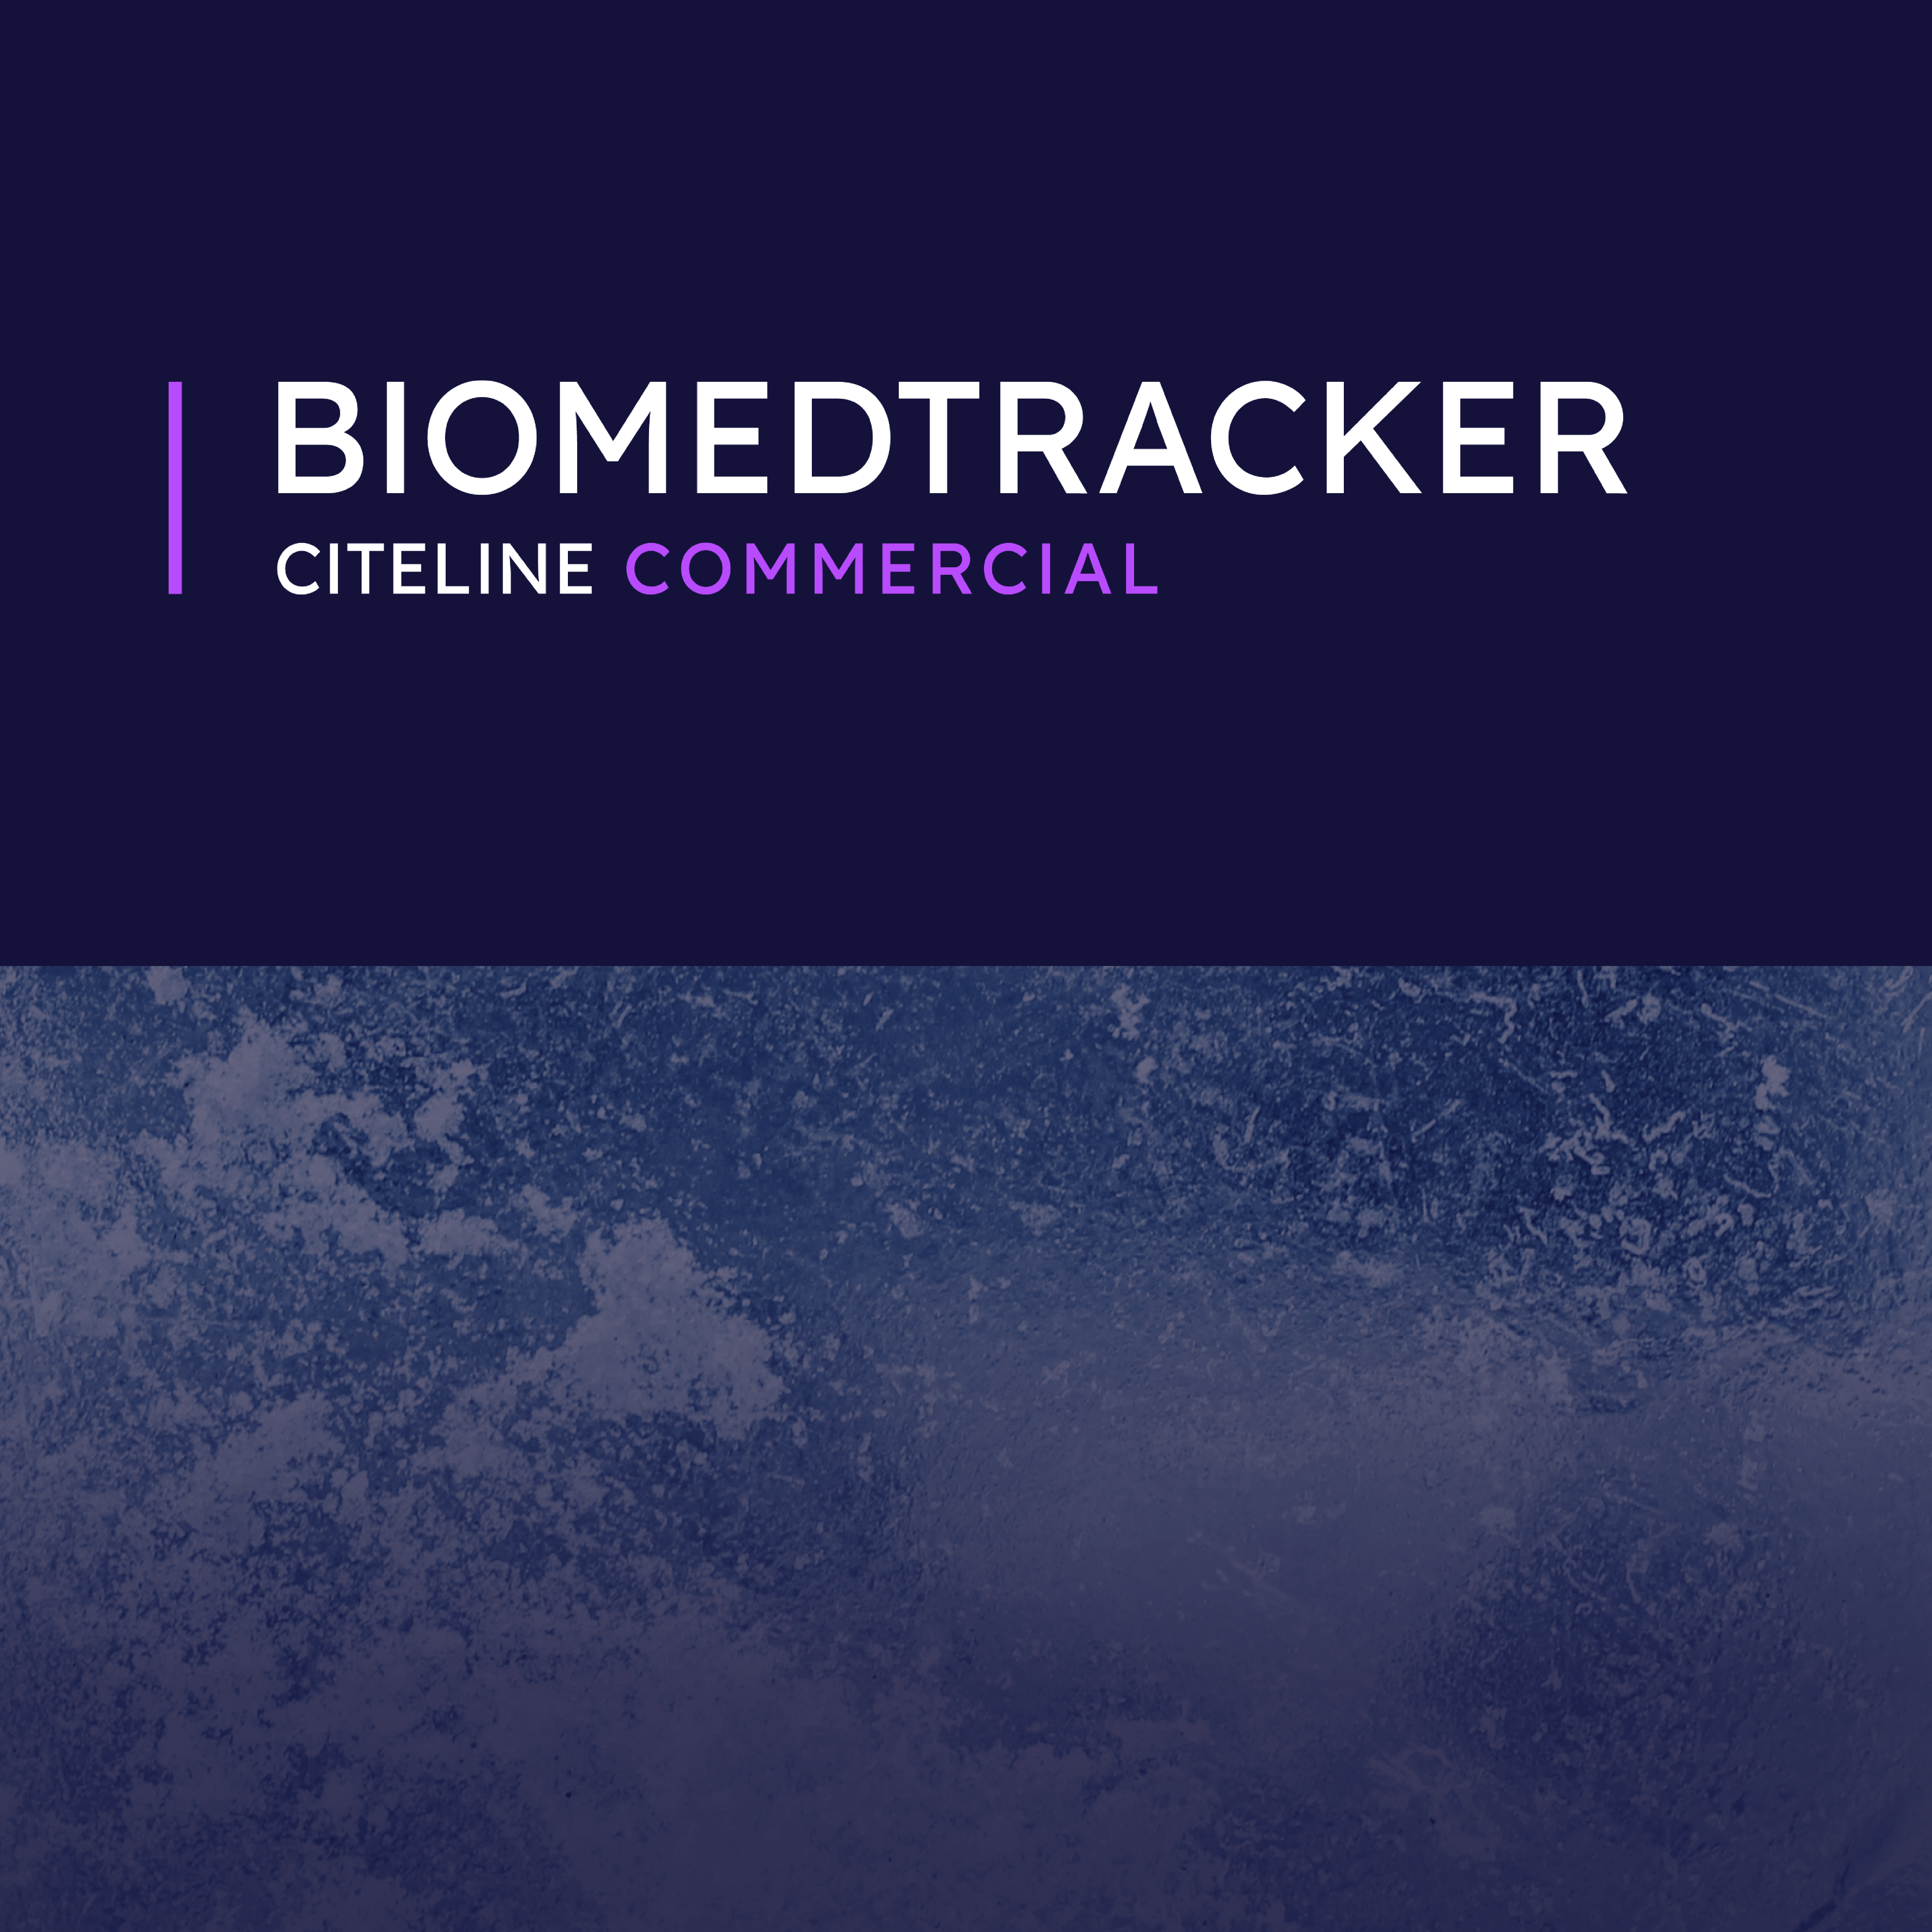 Book a demo to learn more about Biomedtracker.